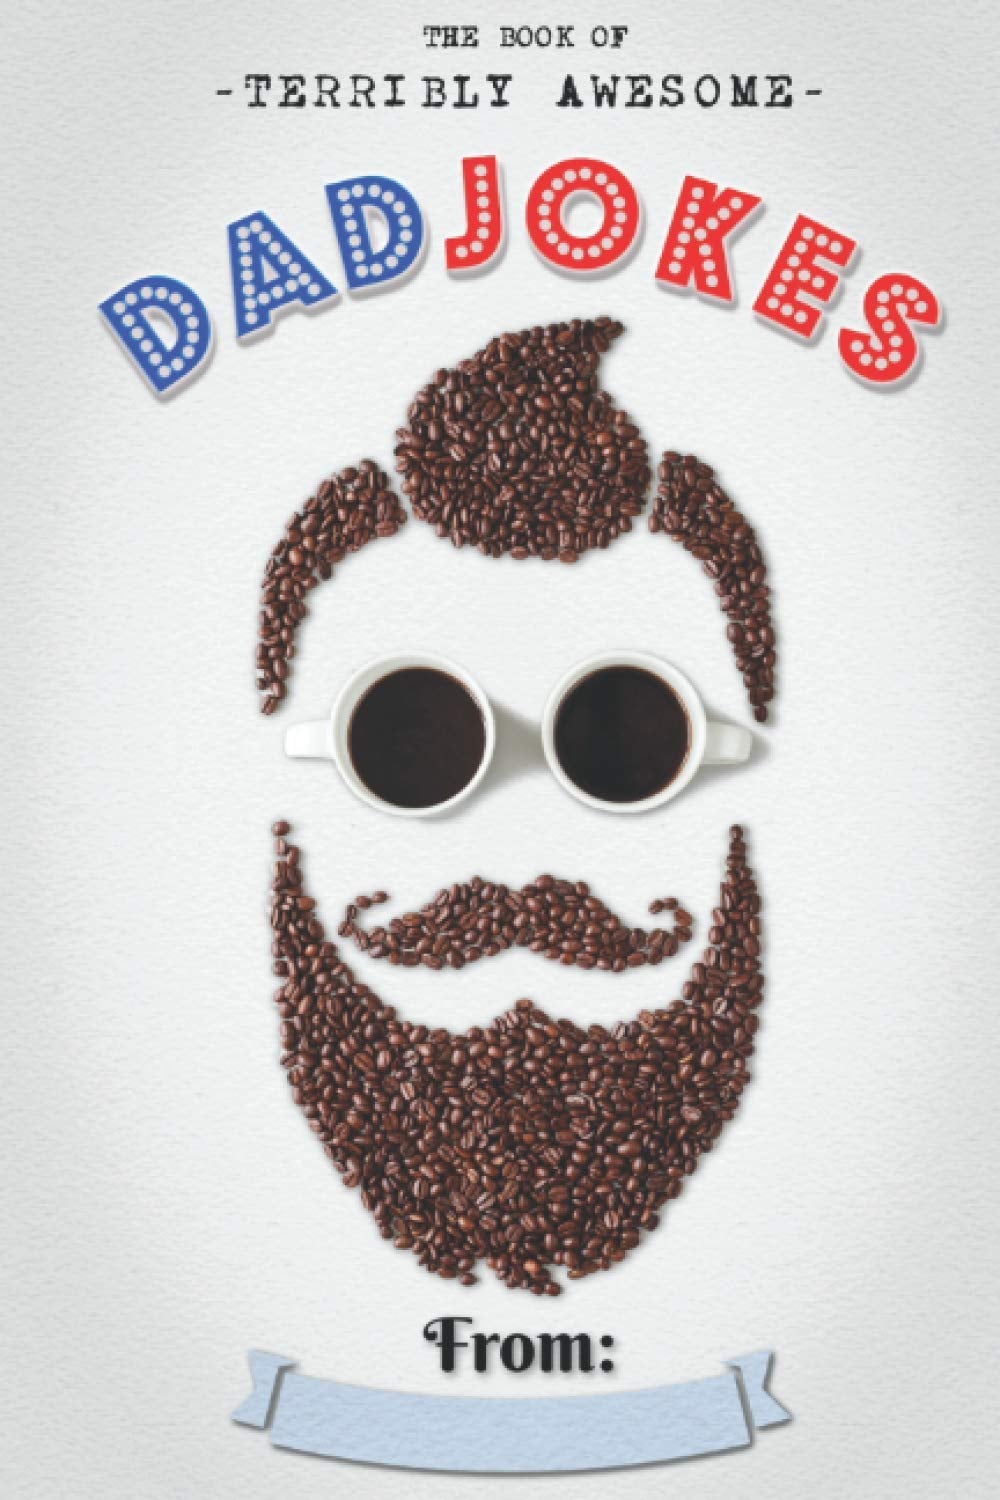 The book with a man on the cover made of coffee beans